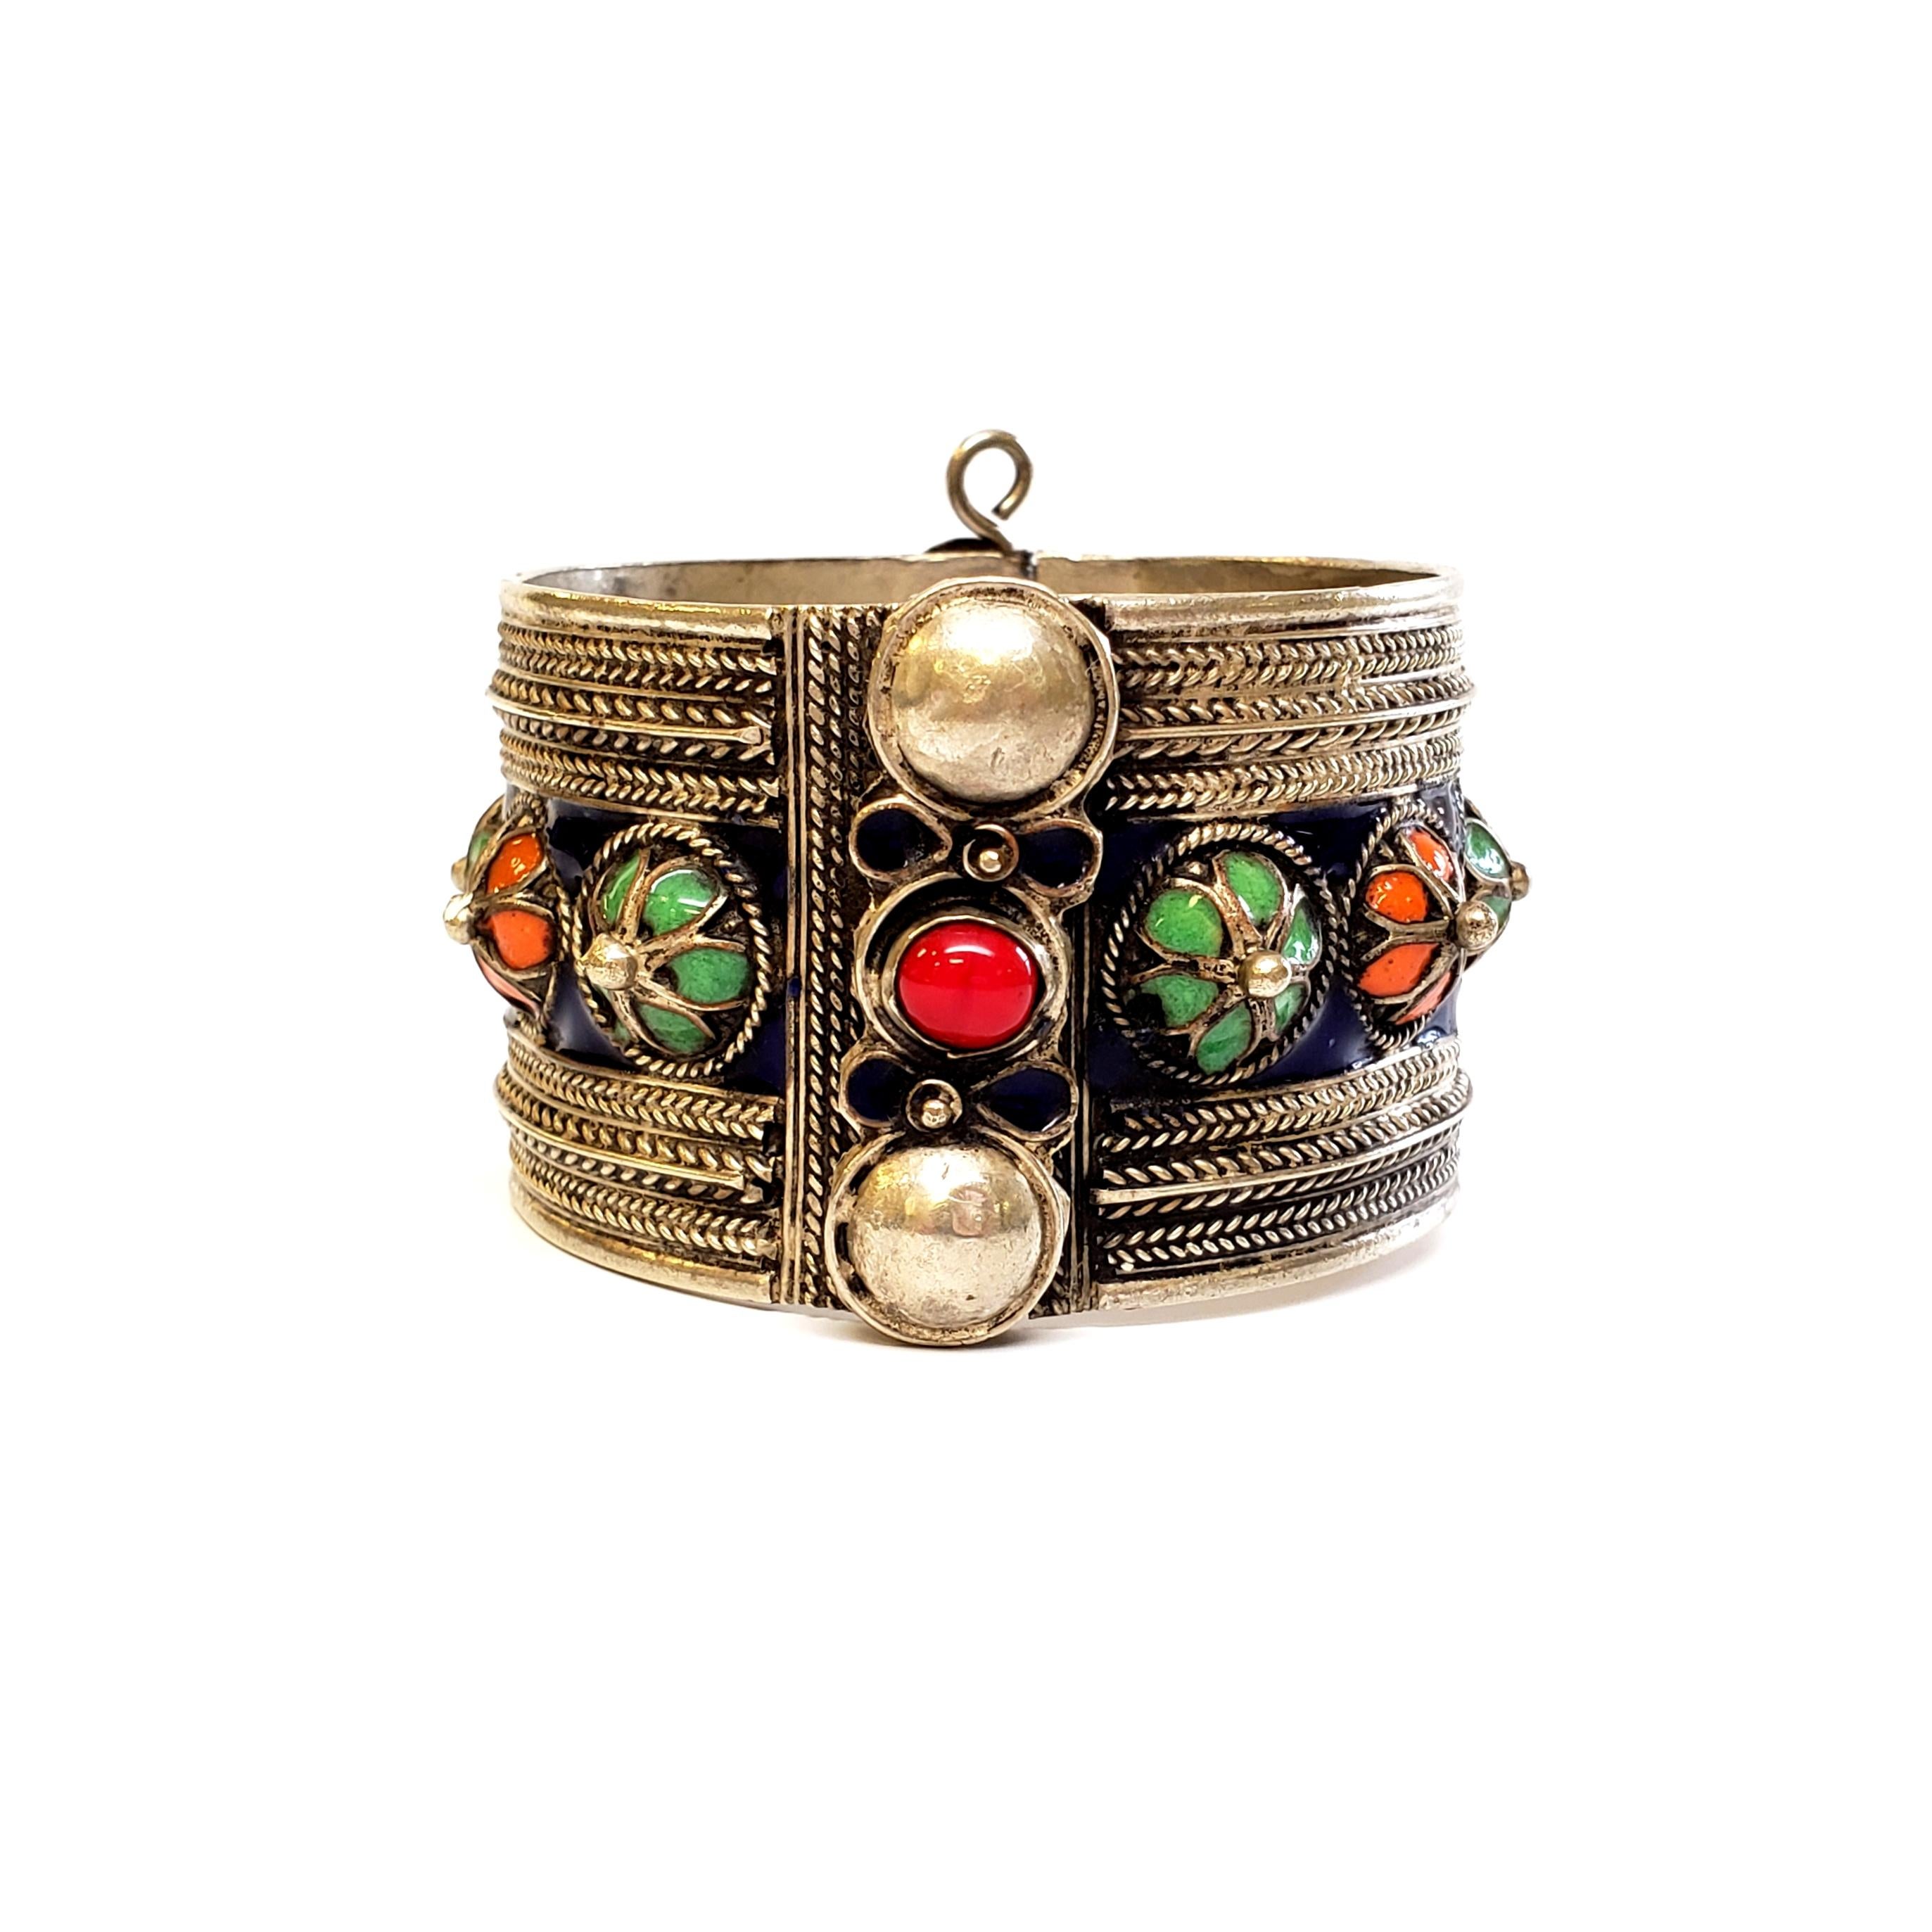 Moroccan sterling silver hinged enamel cuff bracelet, c.1910.

Beautiful example of Berber jewelry of North Africa, a social emblem of prestige and class, also spiritual meaning regarding fertility, prosperity, health and protection from the evil